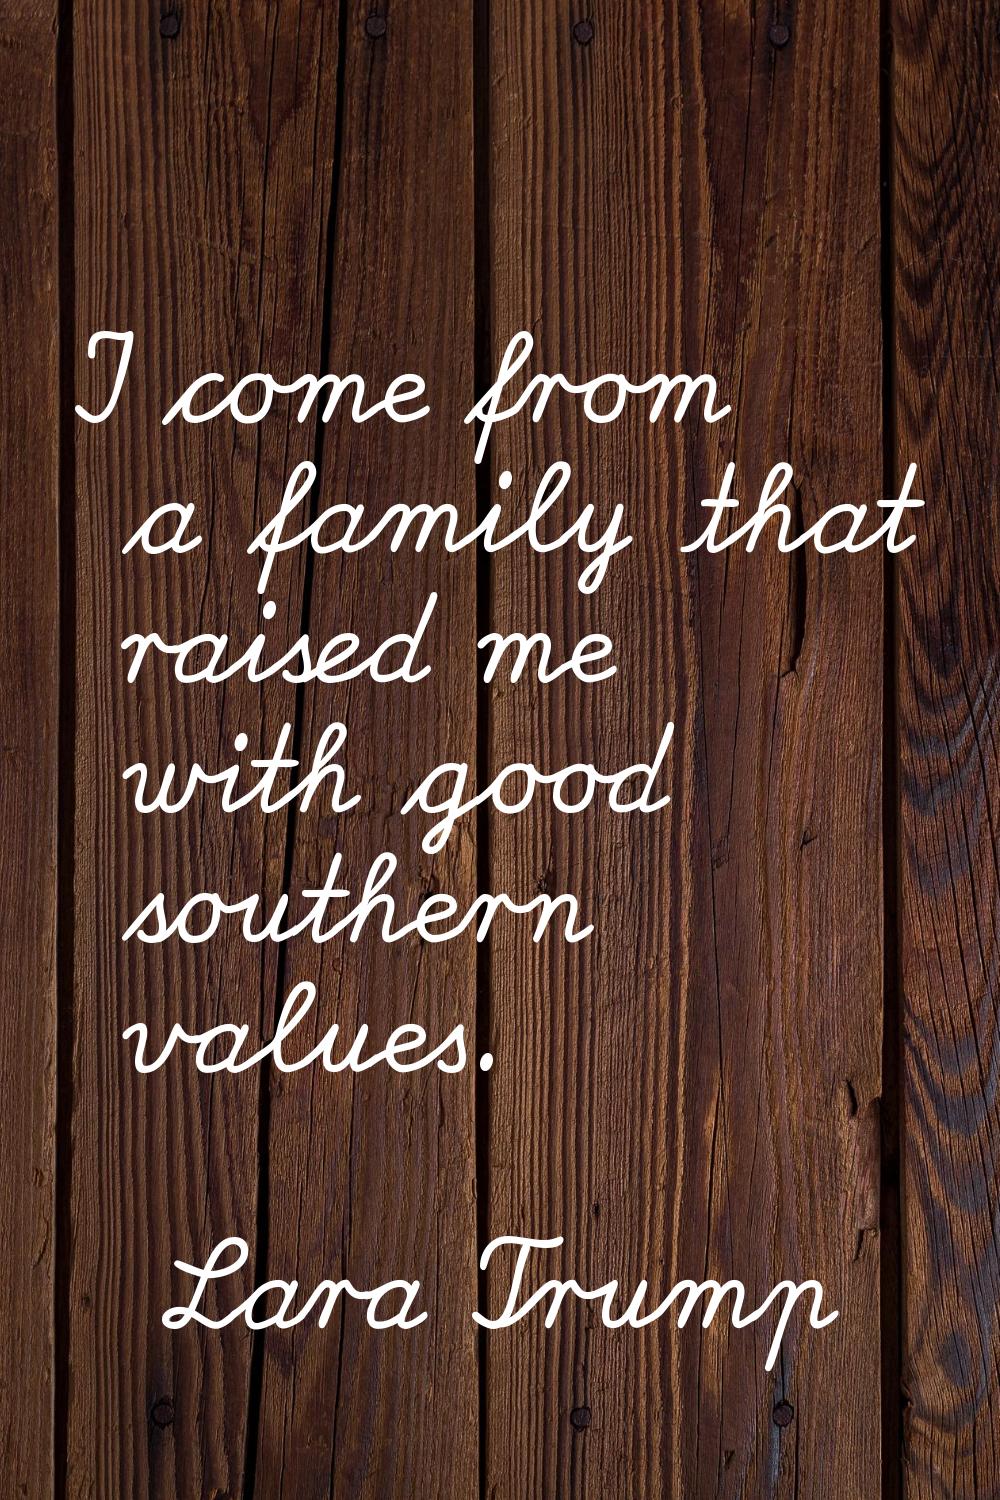 I come from a family that raised me with good southern values.